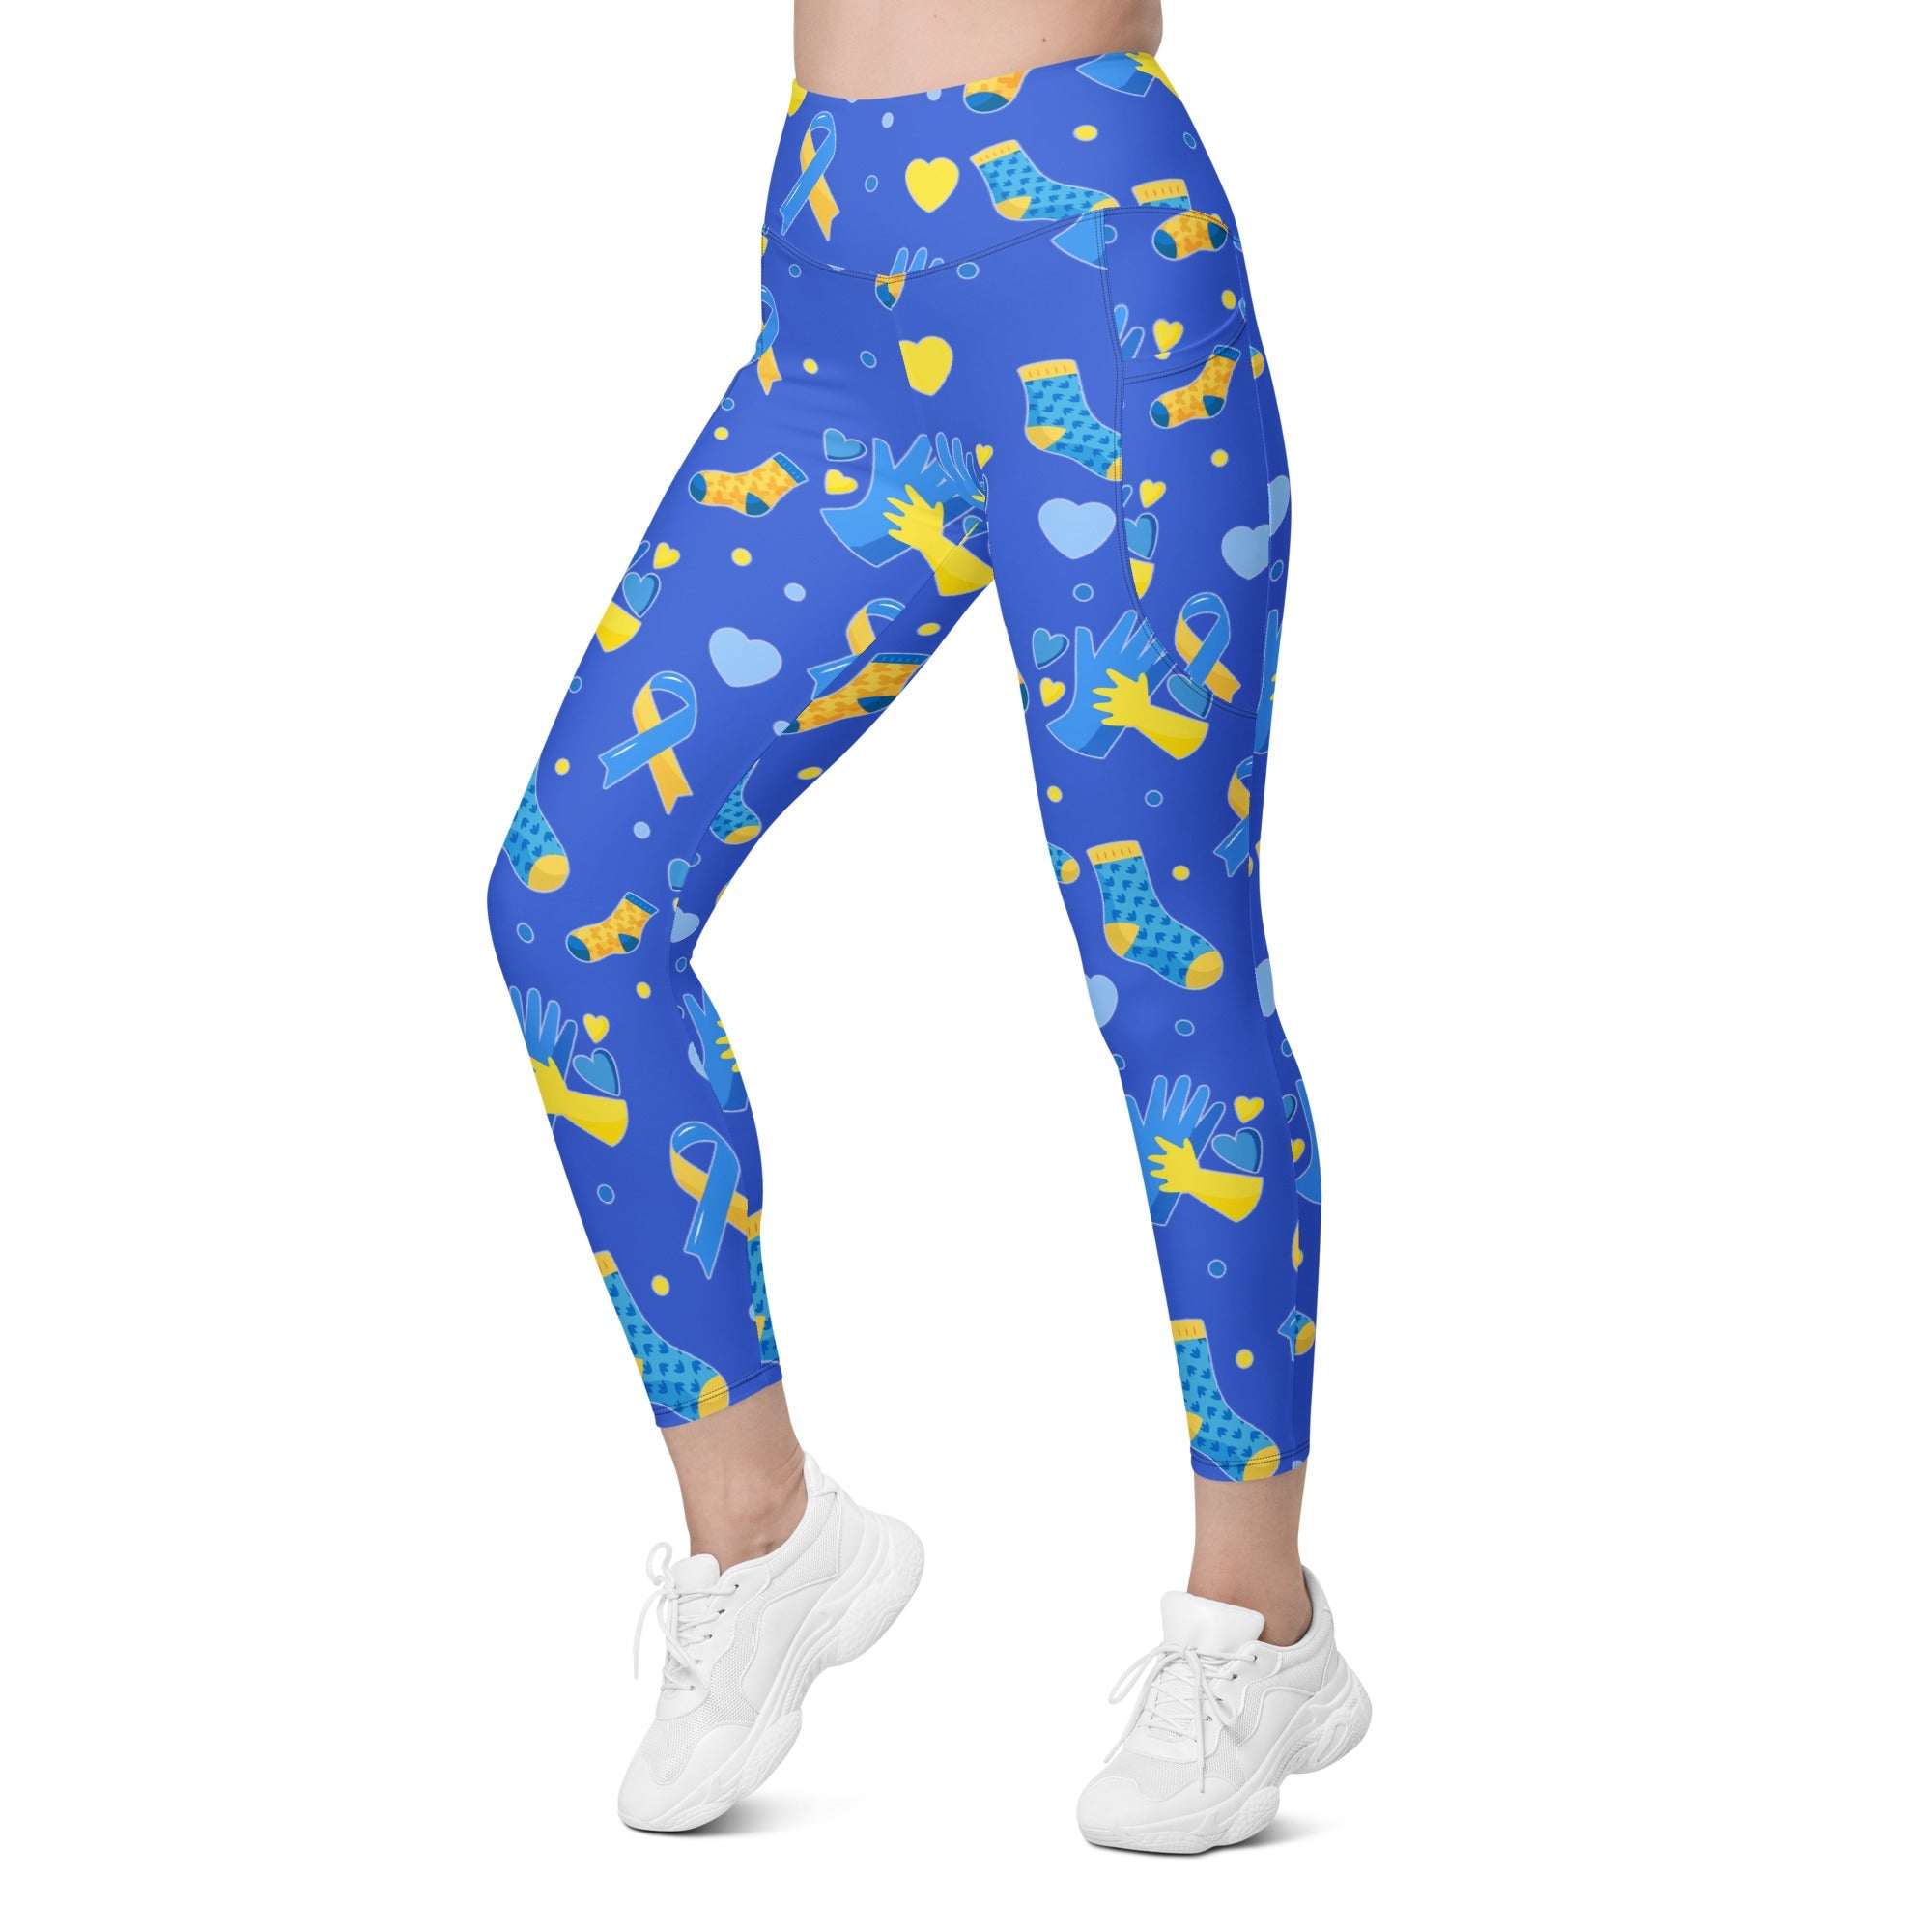 Down Syndrome Awareness Leggings With Pockets